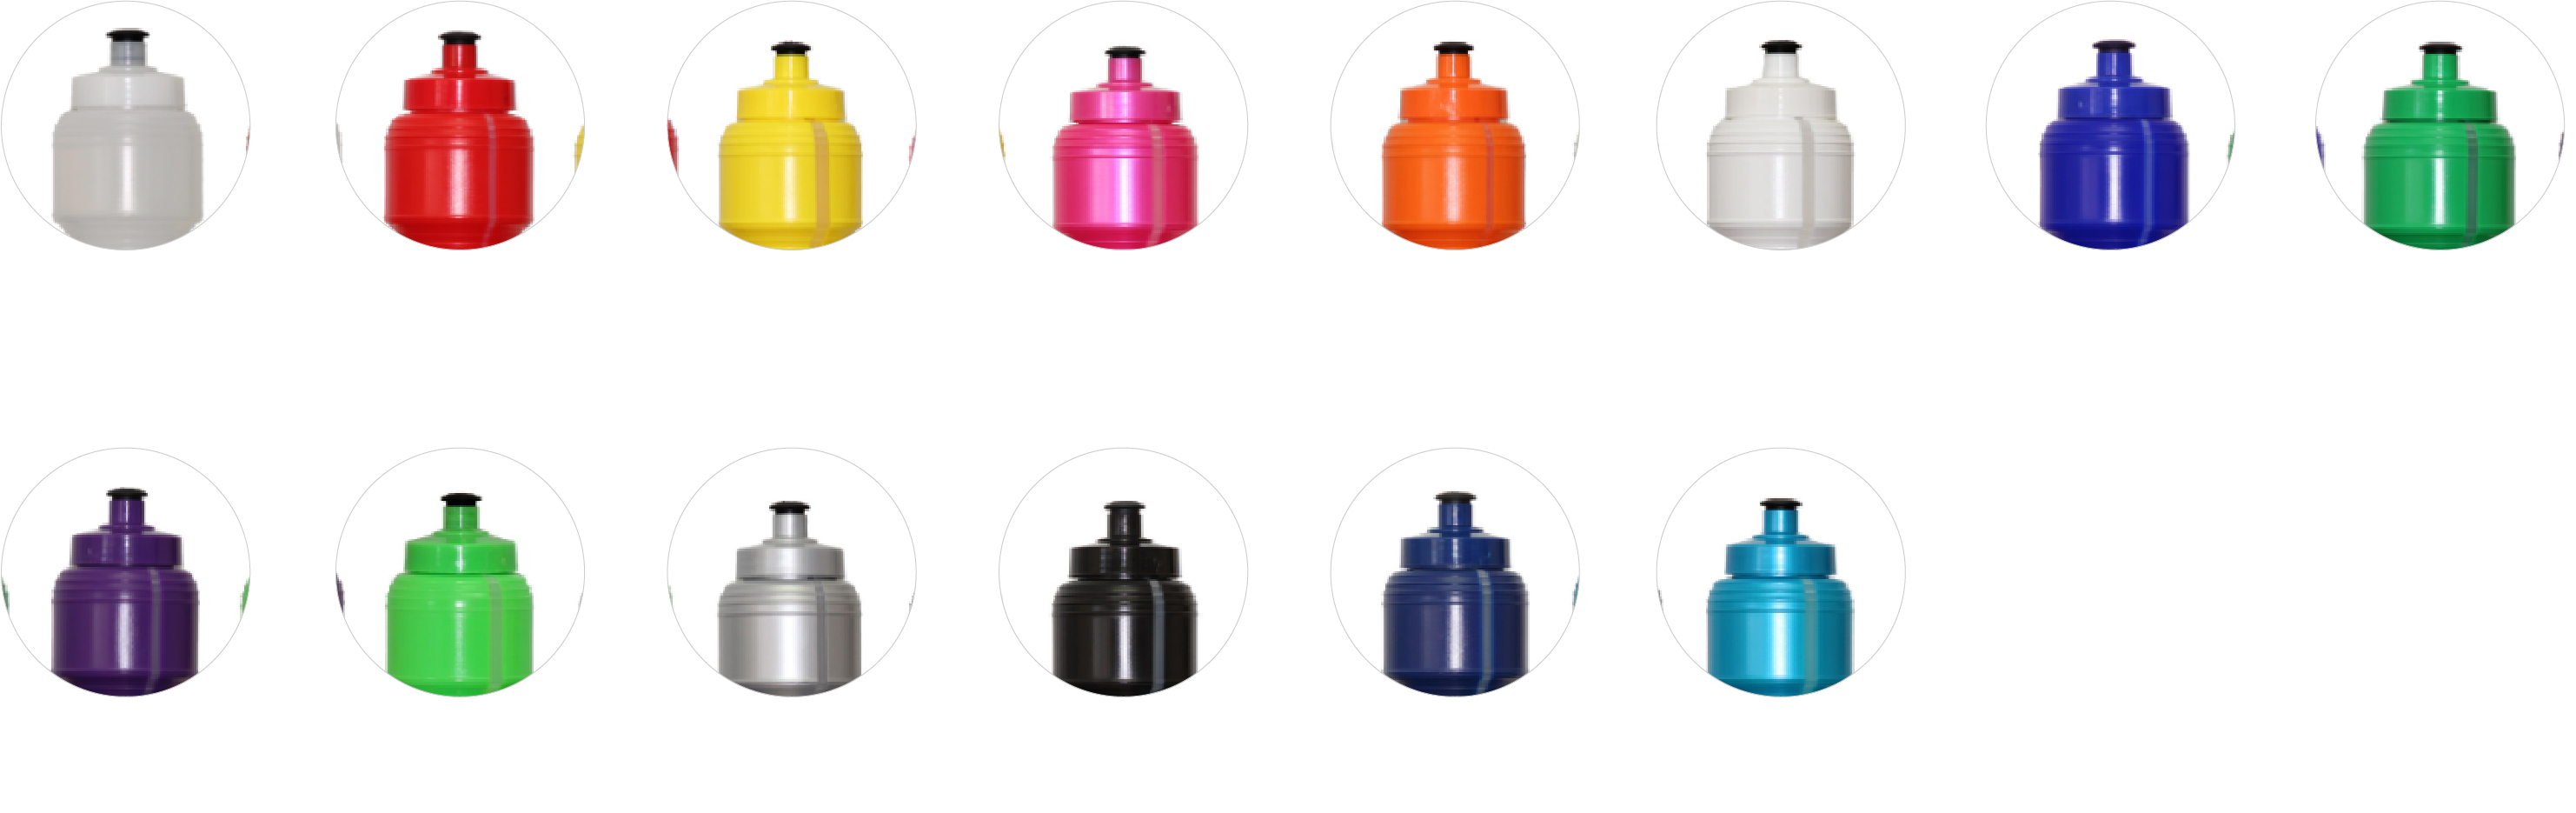 Clear View Drink Bottle Colours